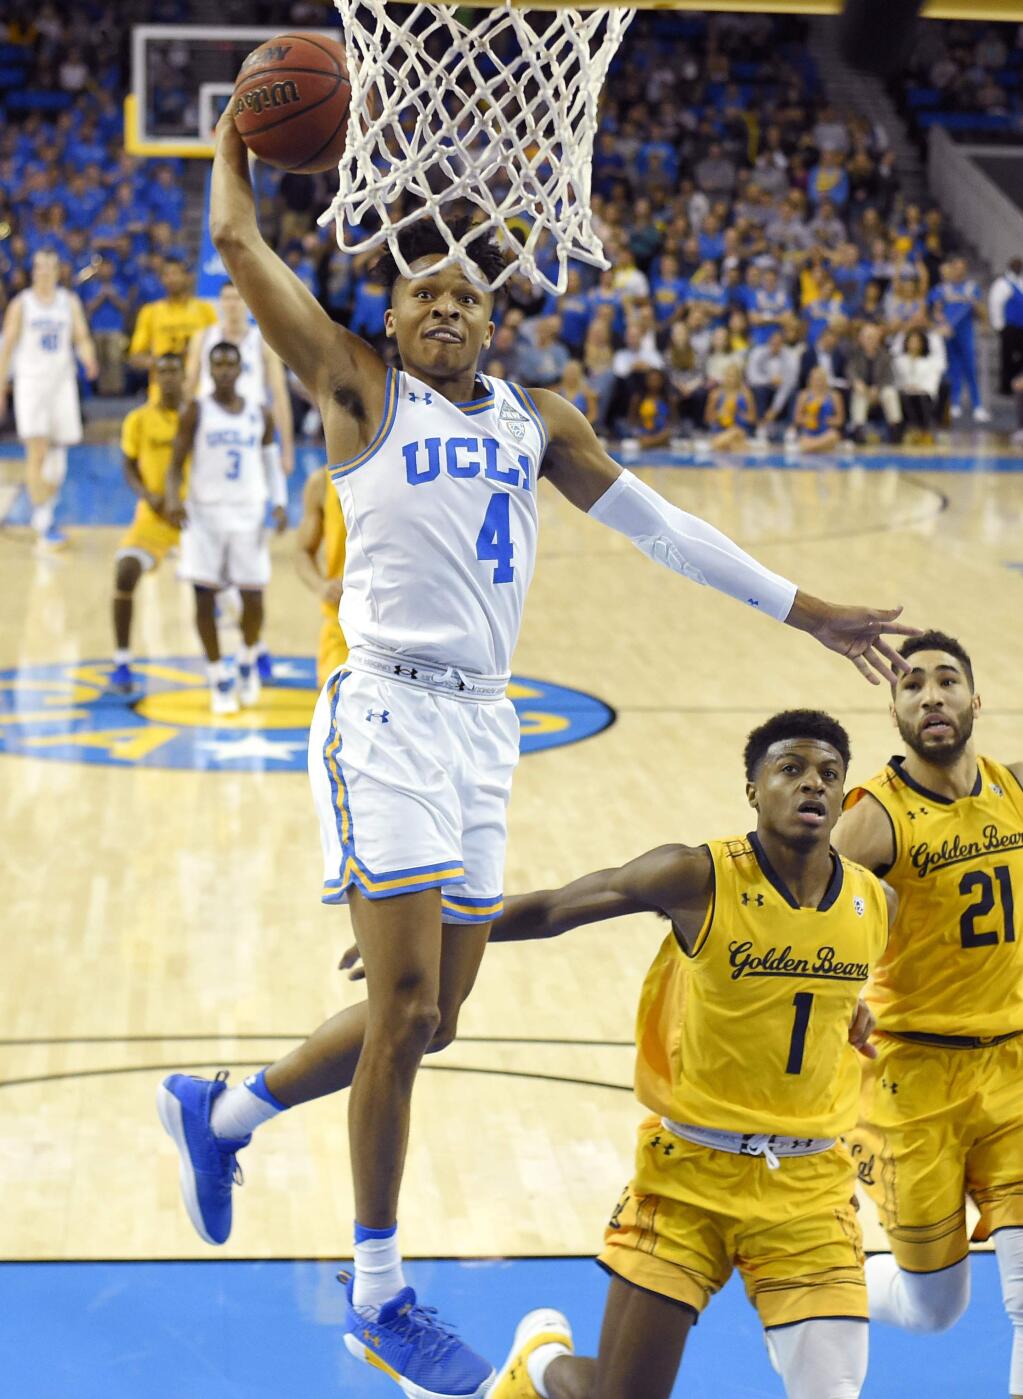 UCLA guard Jaylen Hands goes up for a dunk as Cal guards Darius McNeill, center, and Nick Hamilton defend during the second half Thursday, Jan. 25, 2018, in Los Angeles. UCLA won 70-57. (AP Photo/Mark J. Terrill)